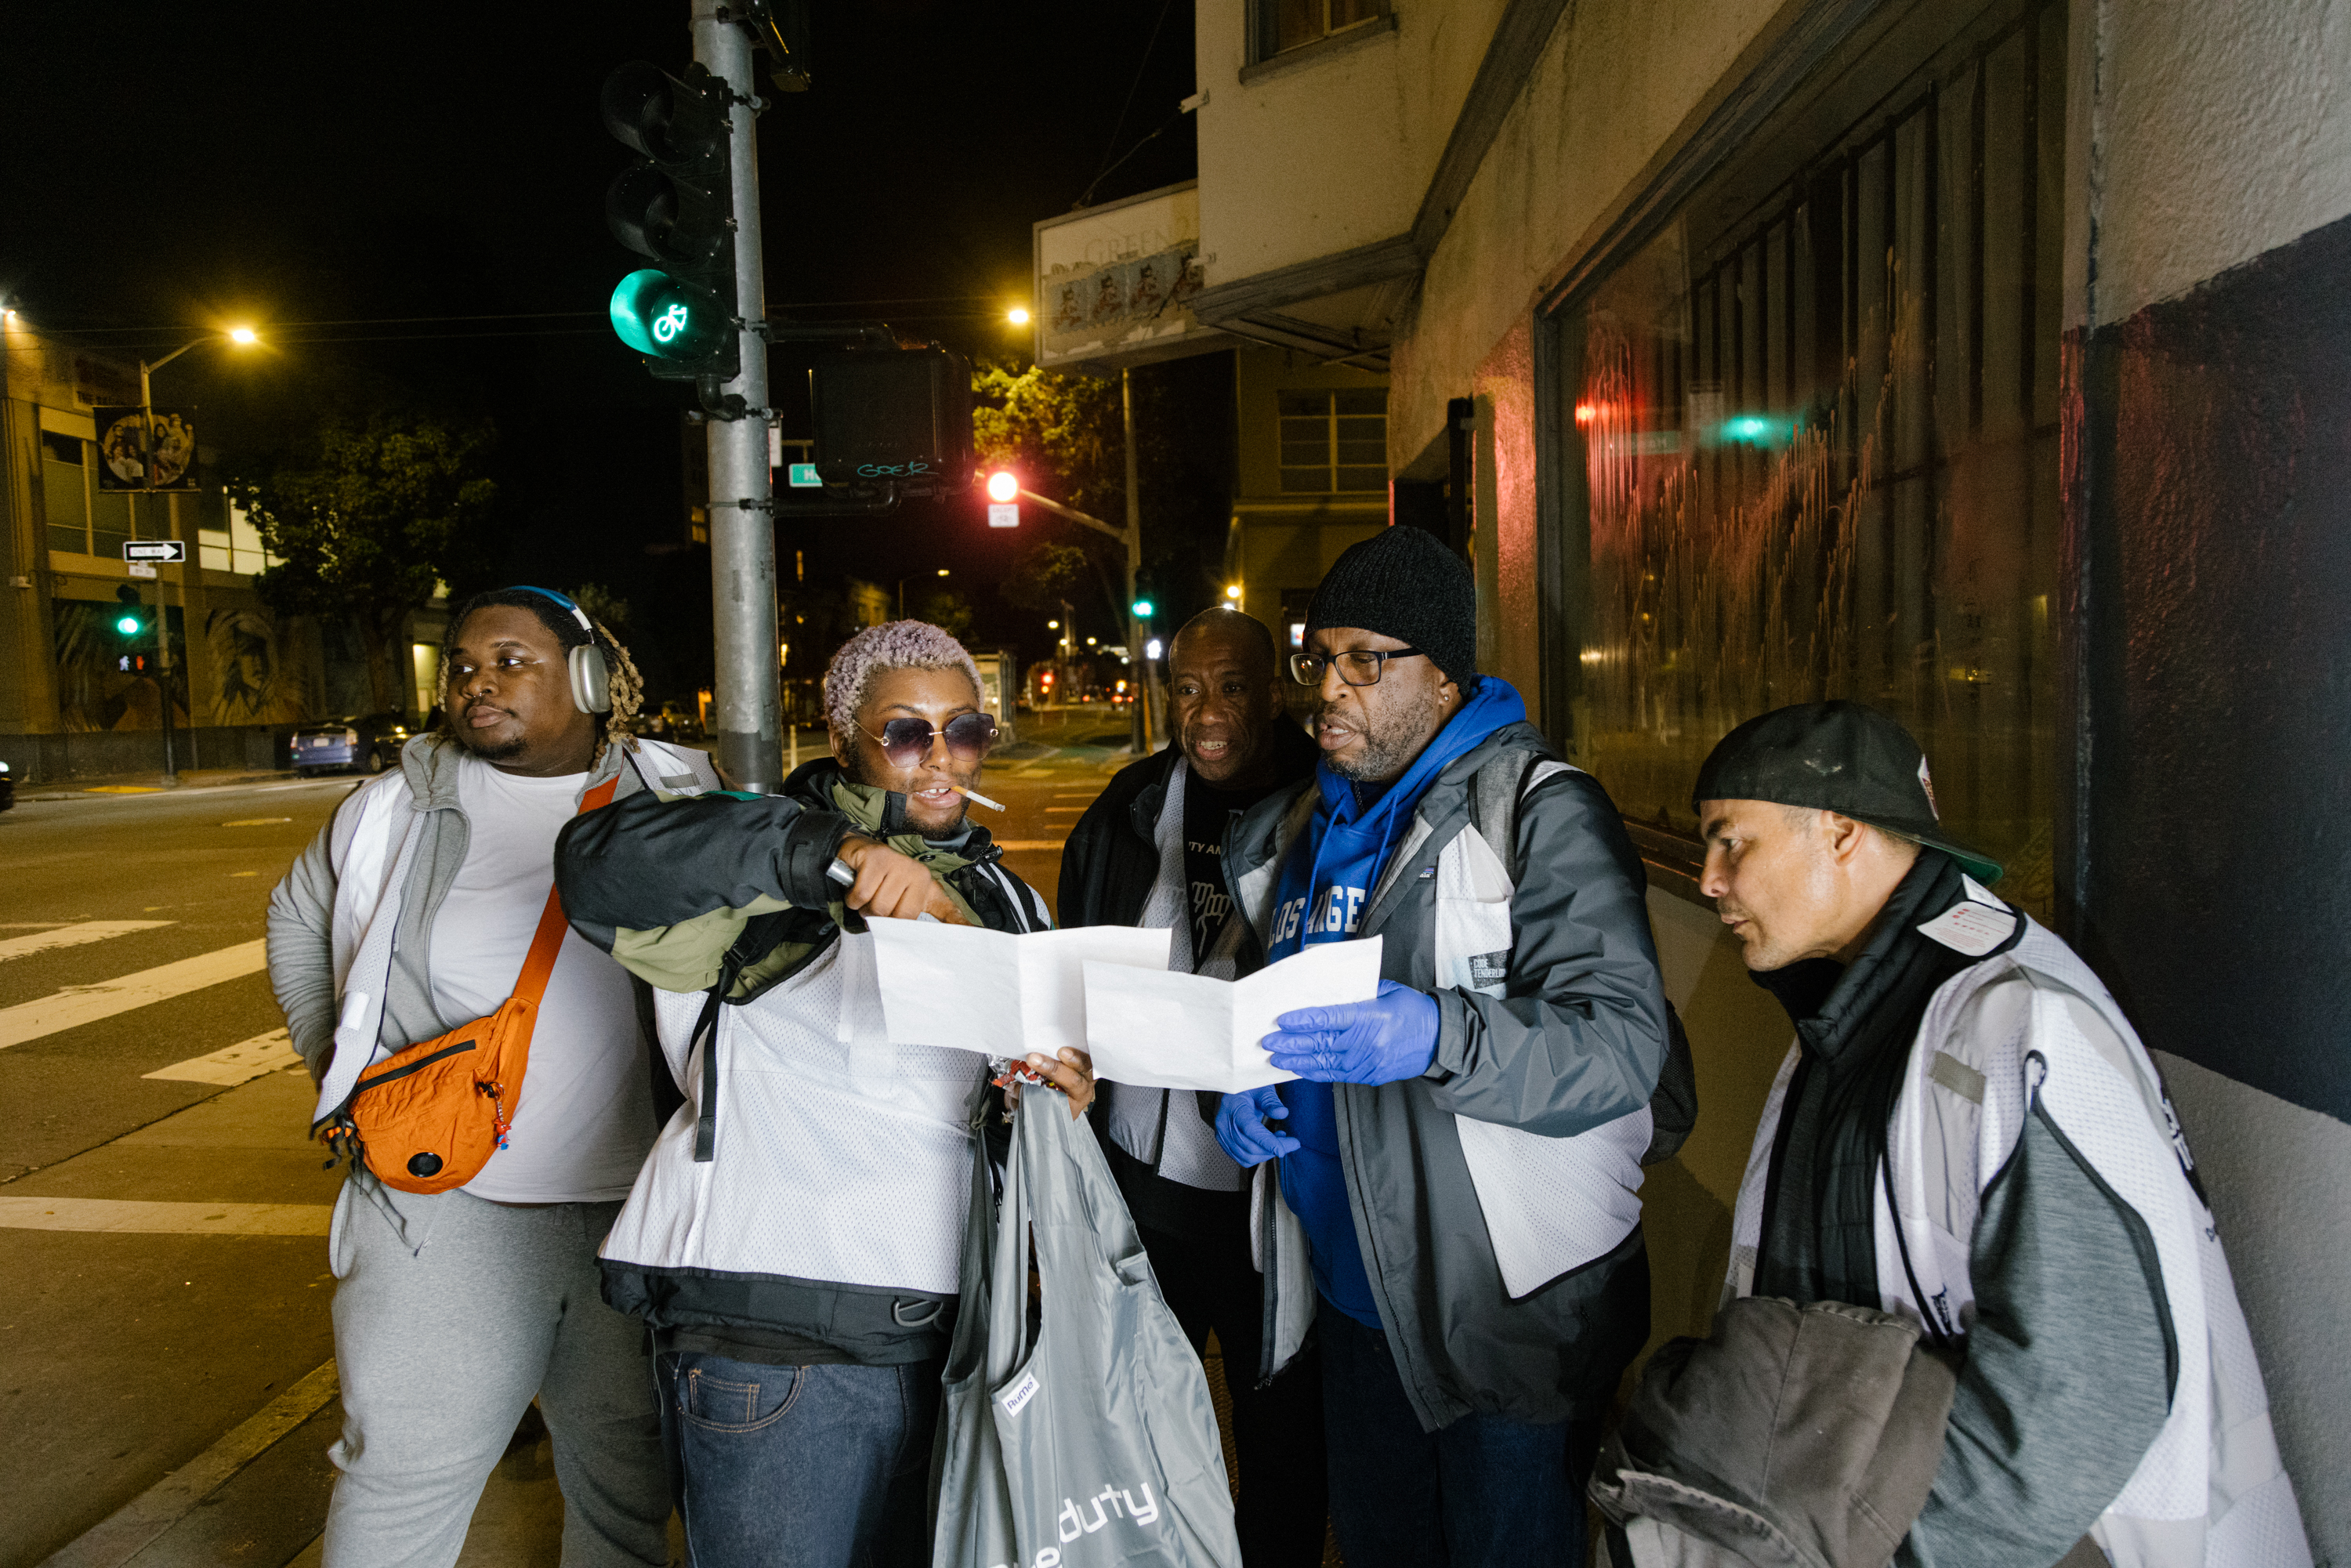 A group of five people stand by a street at night, some focused on reading a paper one person is holding.